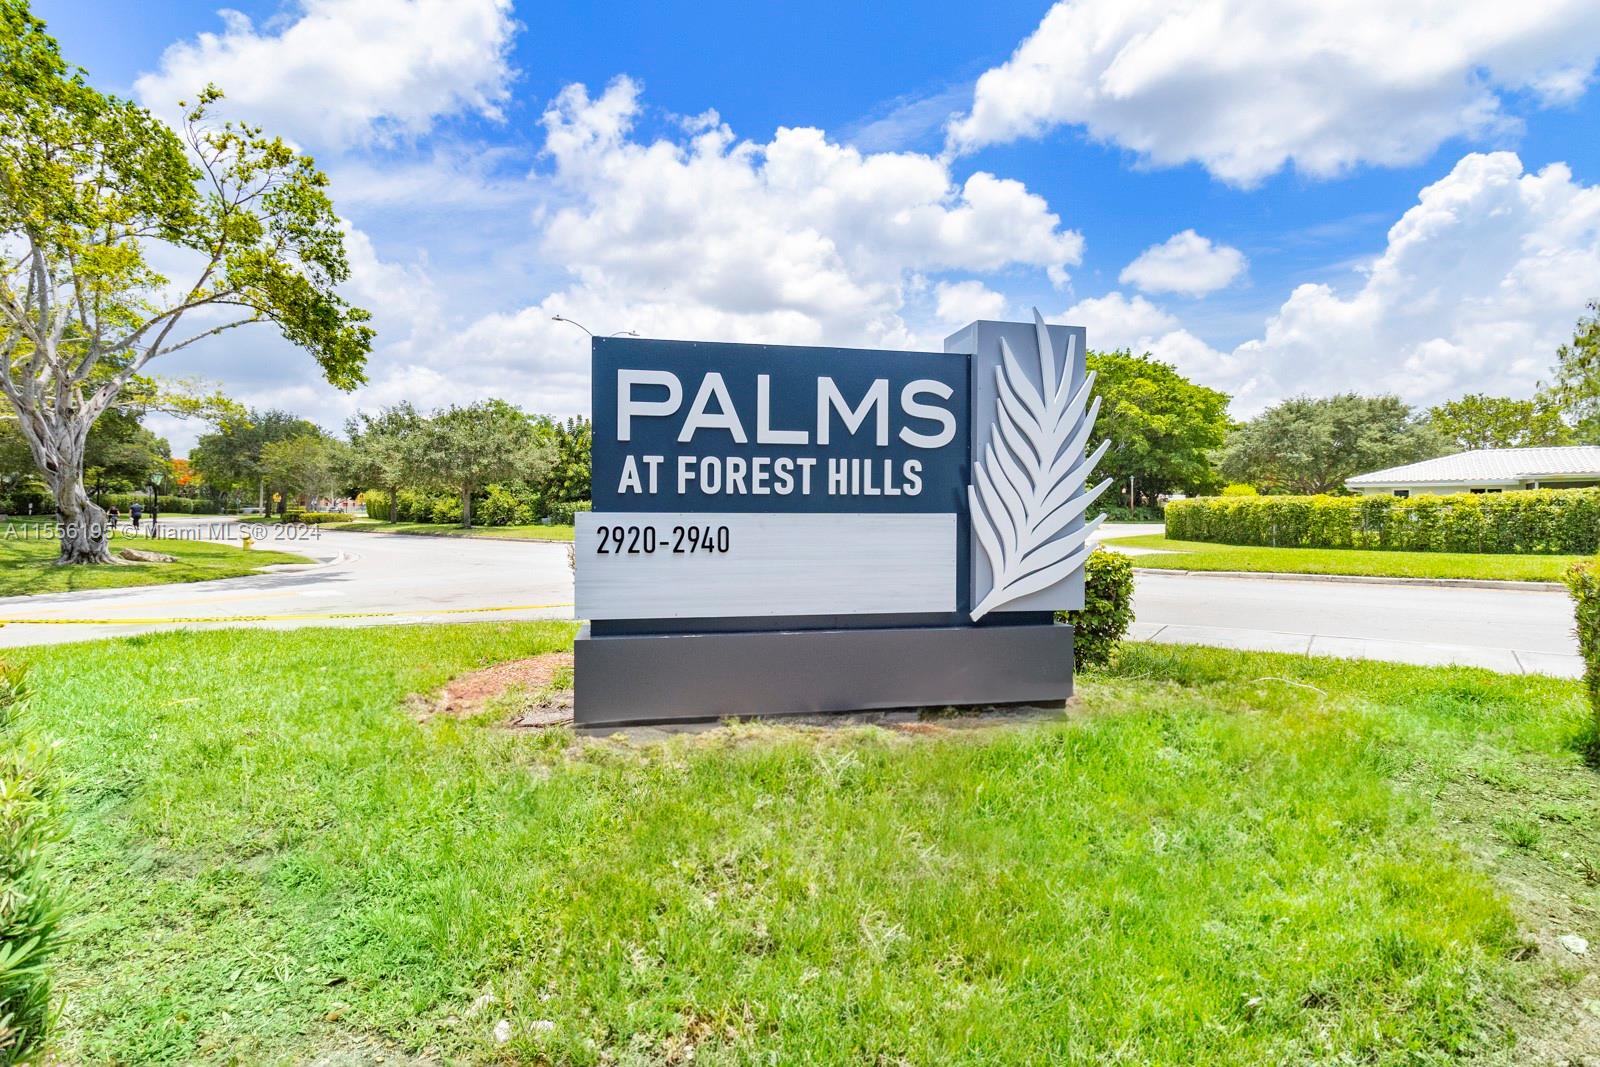 2930 Forest Hills Blvd B3P, Coral Springs, Florida 33065, 1 Bedroom Bedrooms, ,1 BathroomBathrooms,Residentiallease,For Rent,2930 Forest Hills Blvd B3P,A11556195